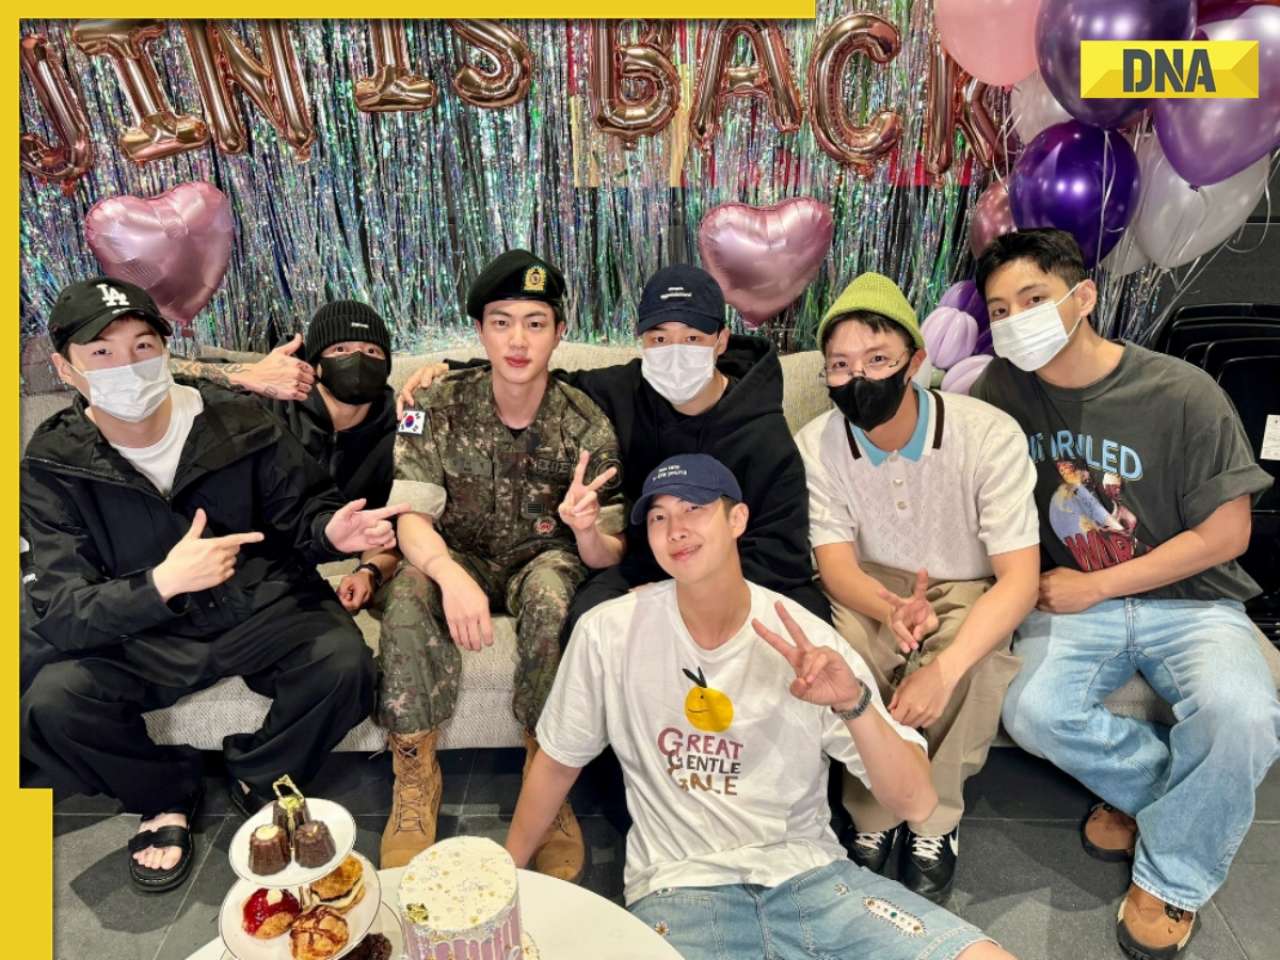 BTS' Jin poses with Jungkook, RM, V, Suga, Jimin, J-Hope after military discharge; reunion photo breaks the internet